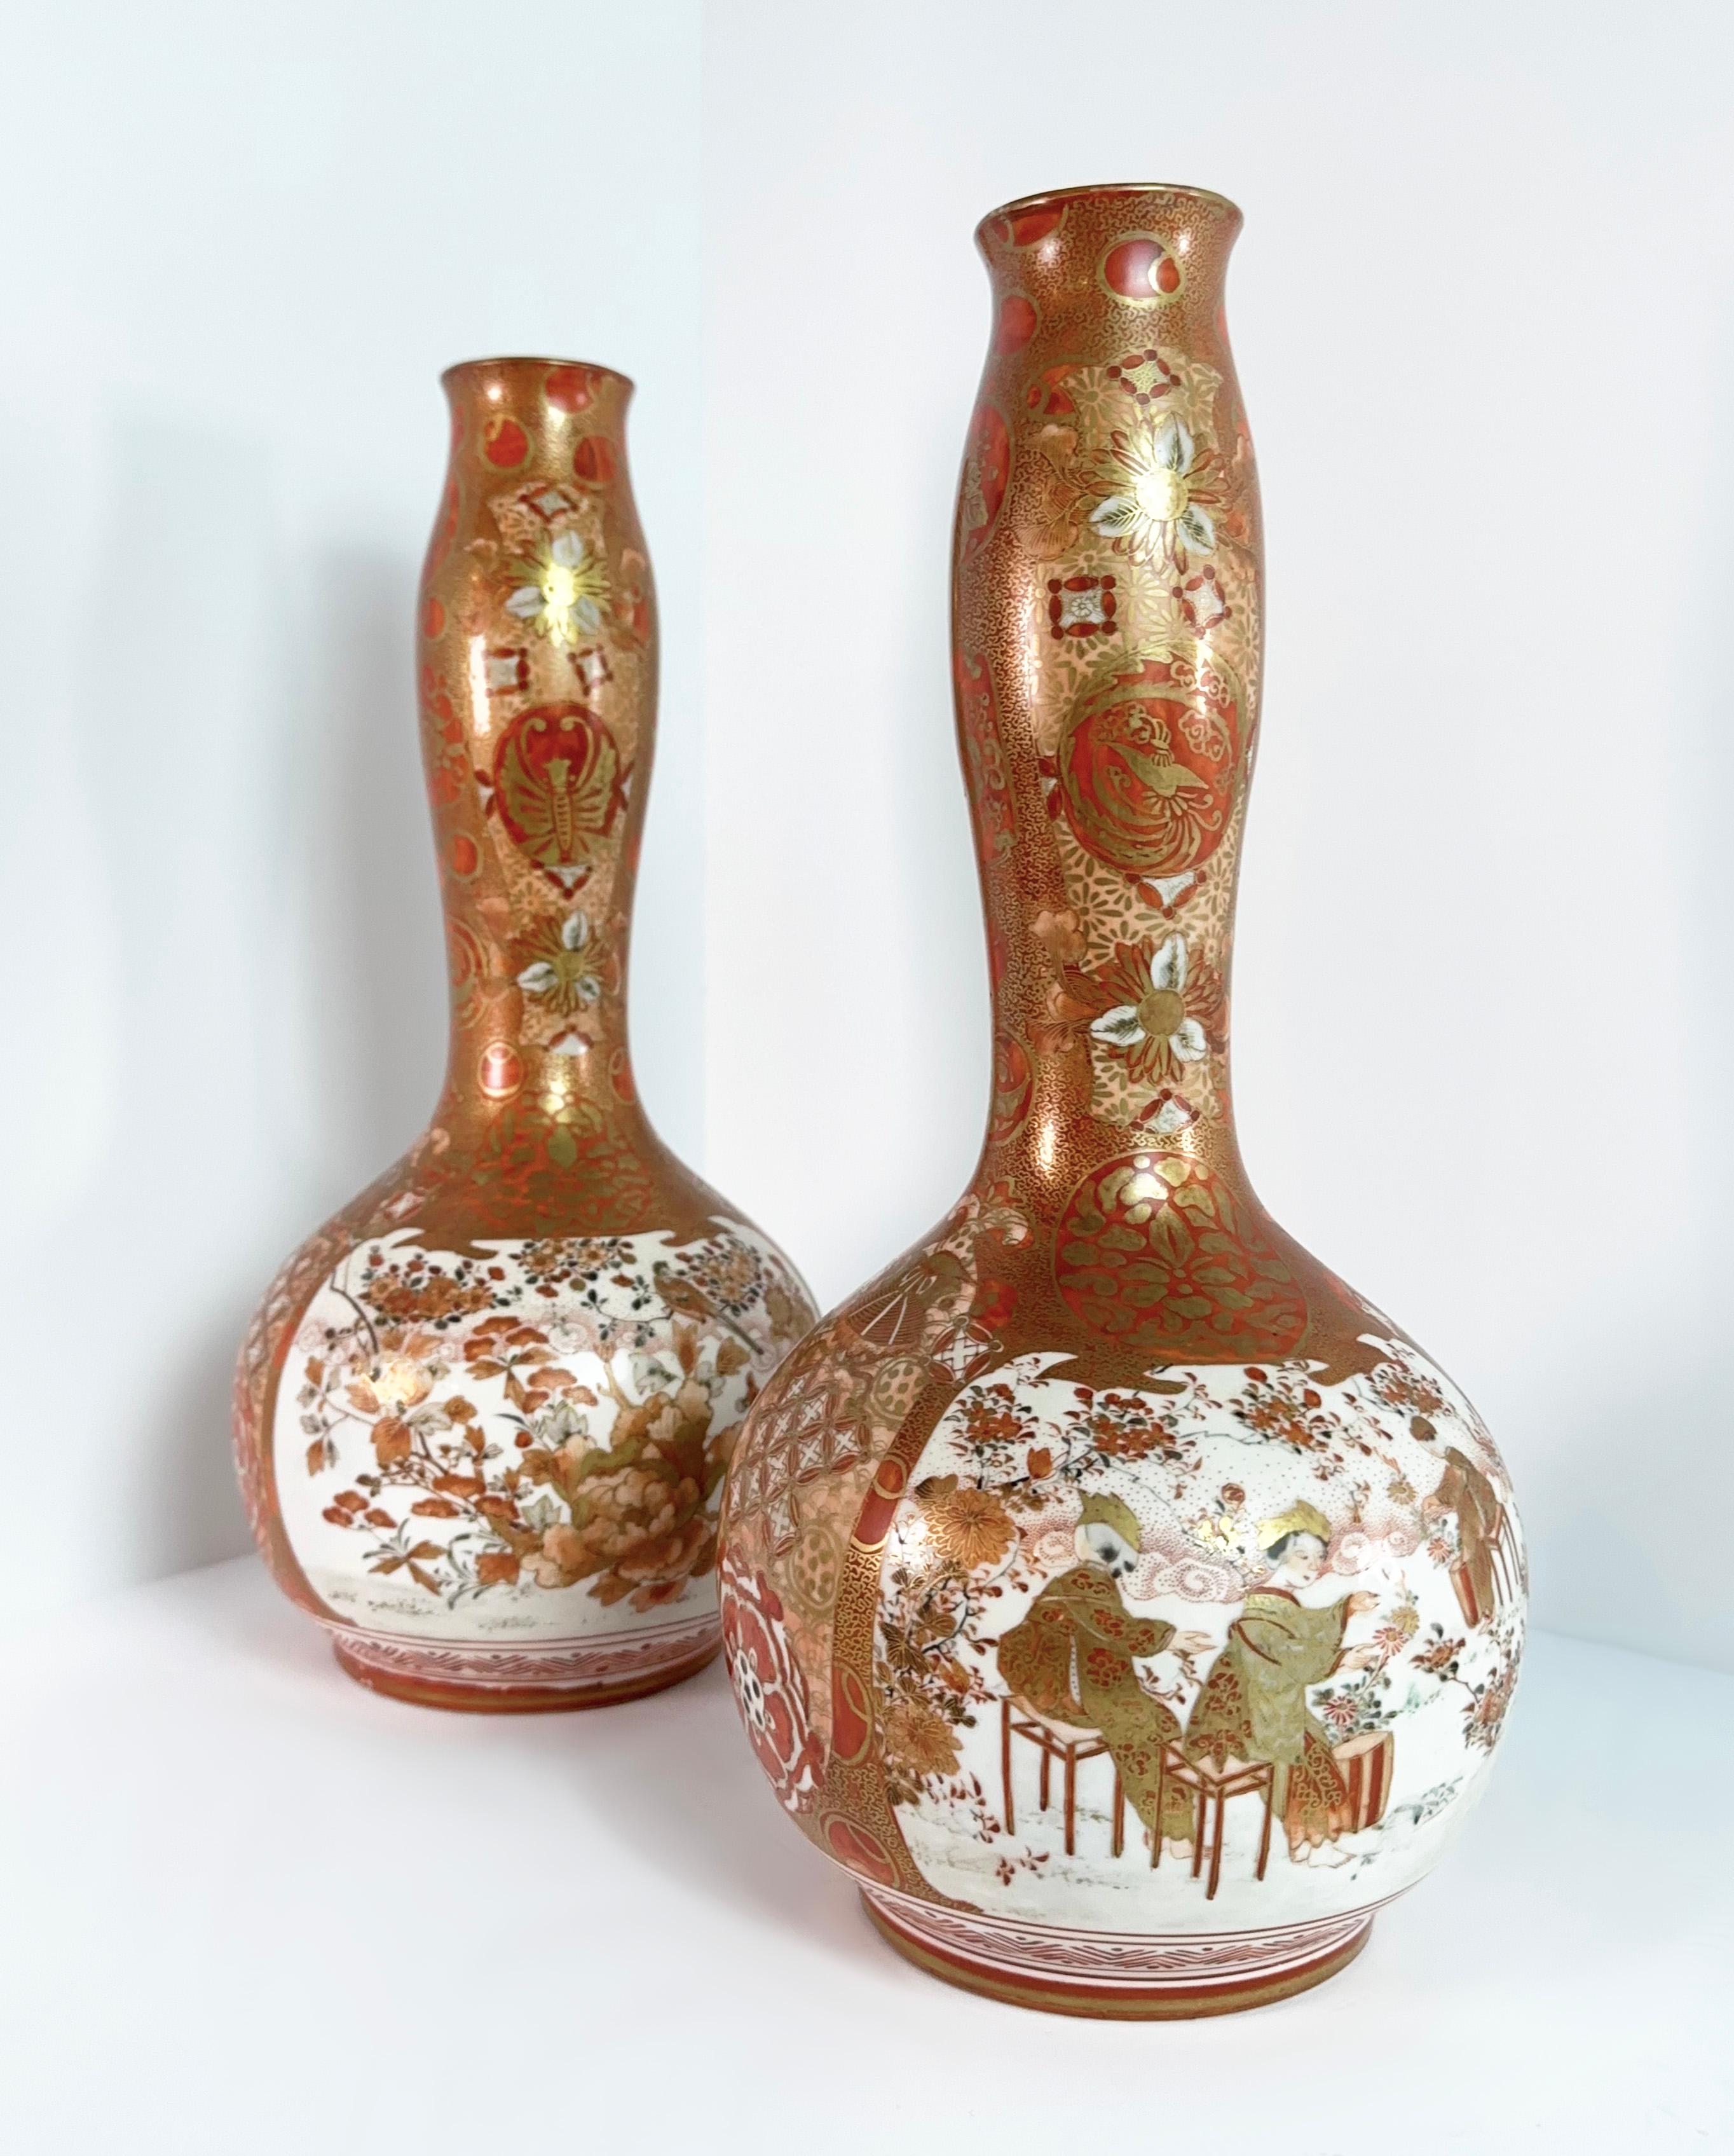 Exquisite Meiji Masterpiece Kutani Gourd Vases by Dai Nippon

Discover this exquisite pair of Japanese treasures from the Meiji period. These Kutani gourd vases are a testament to the unmatched artistry of Dai Nippon artisans in Japan.

These vases